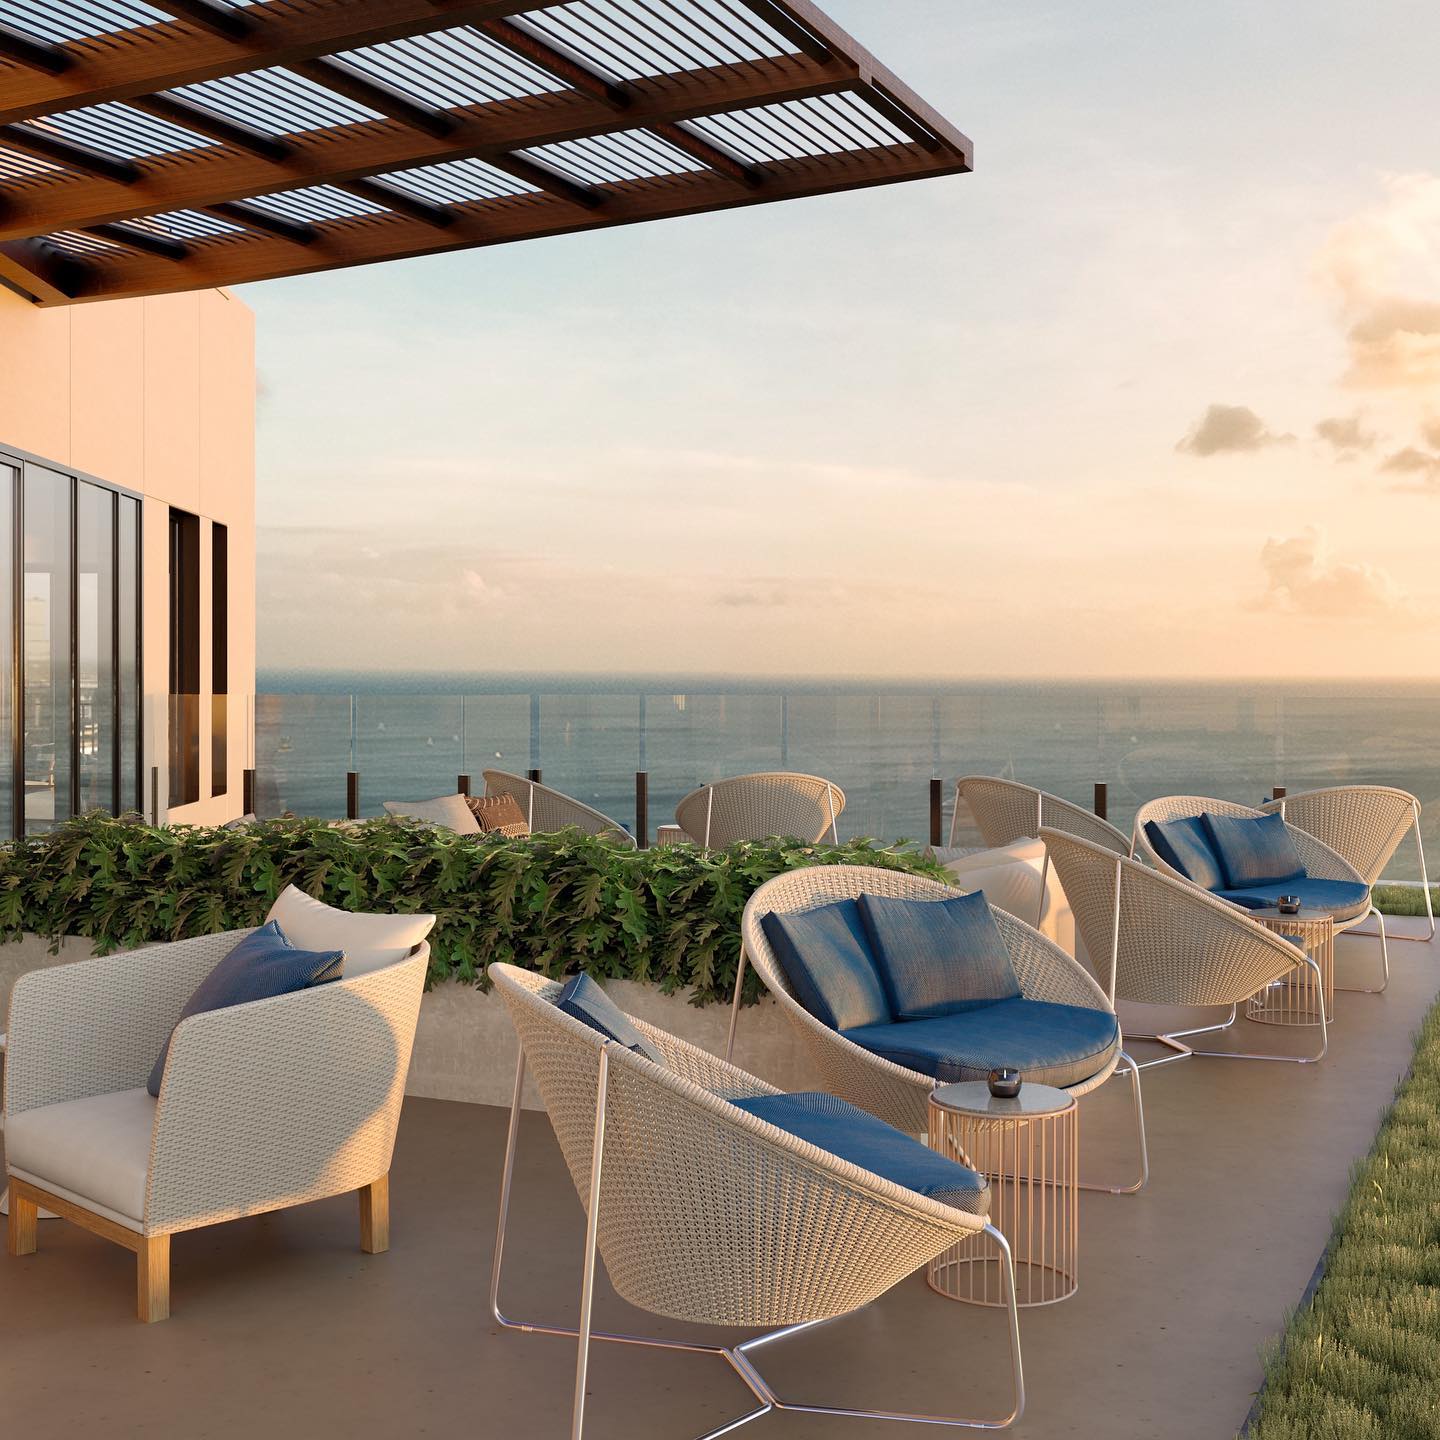 Come this October, ‘A‘ali‘i residents can enjoy not one, but two, amenity decks. In addition to the Level 8 Pool Deck, the Lānai 42 Sky Deck is a remarkable rooftop oasis. Perched 400 feet above the city, the penthouse-level amenity provides one-of-a-kind leisure and fitness from sunrise to sunset, all with an epic ocean view.